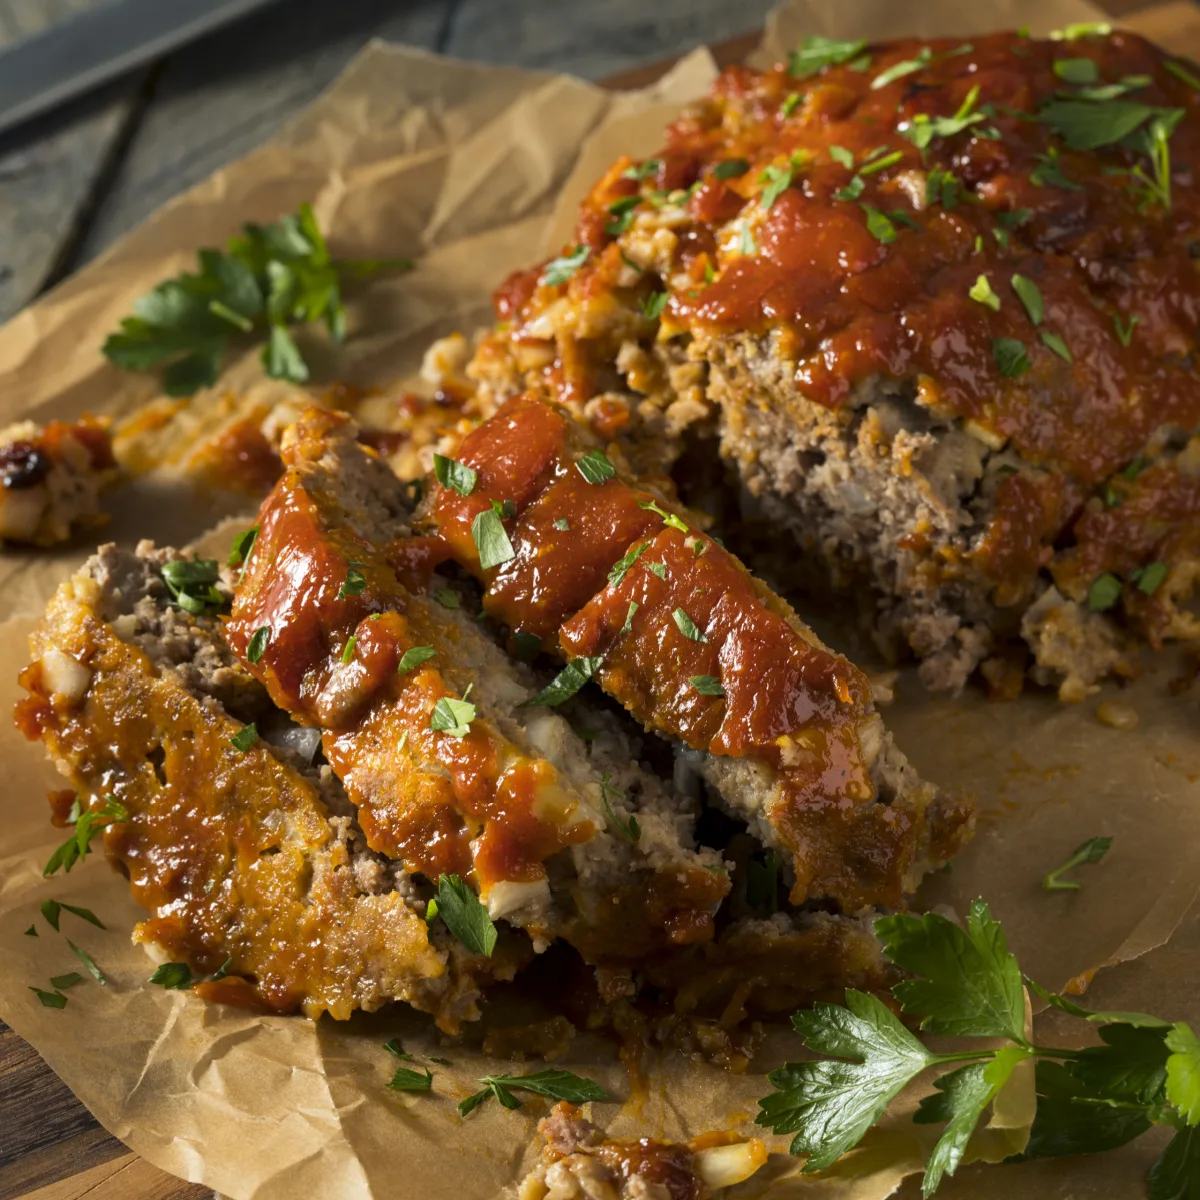 a cooked meatloaf made with one pound of ground beef.